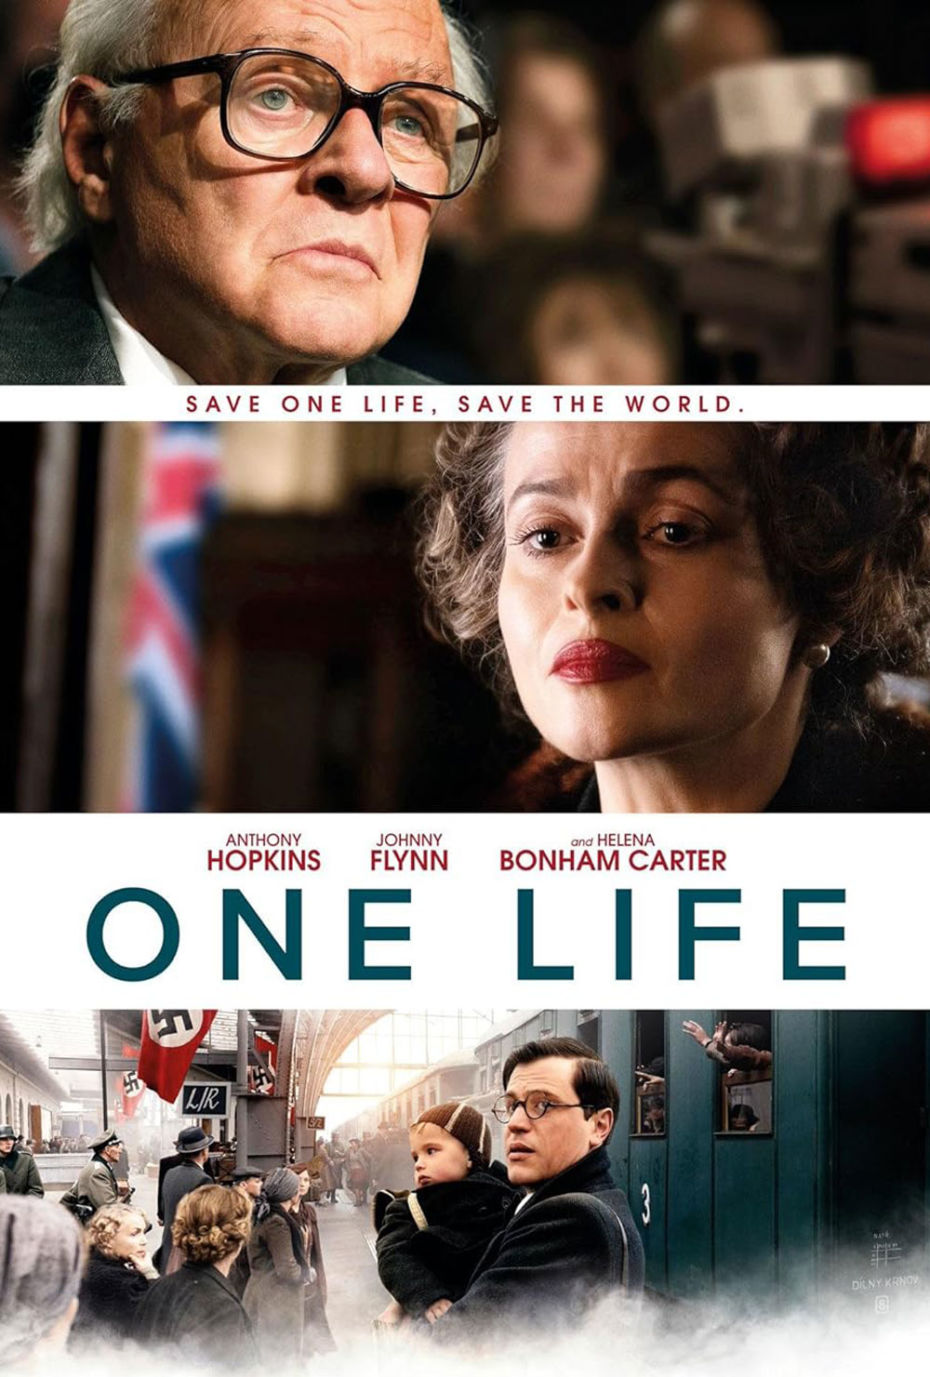 Cinema poster for film 'One Life' 12A